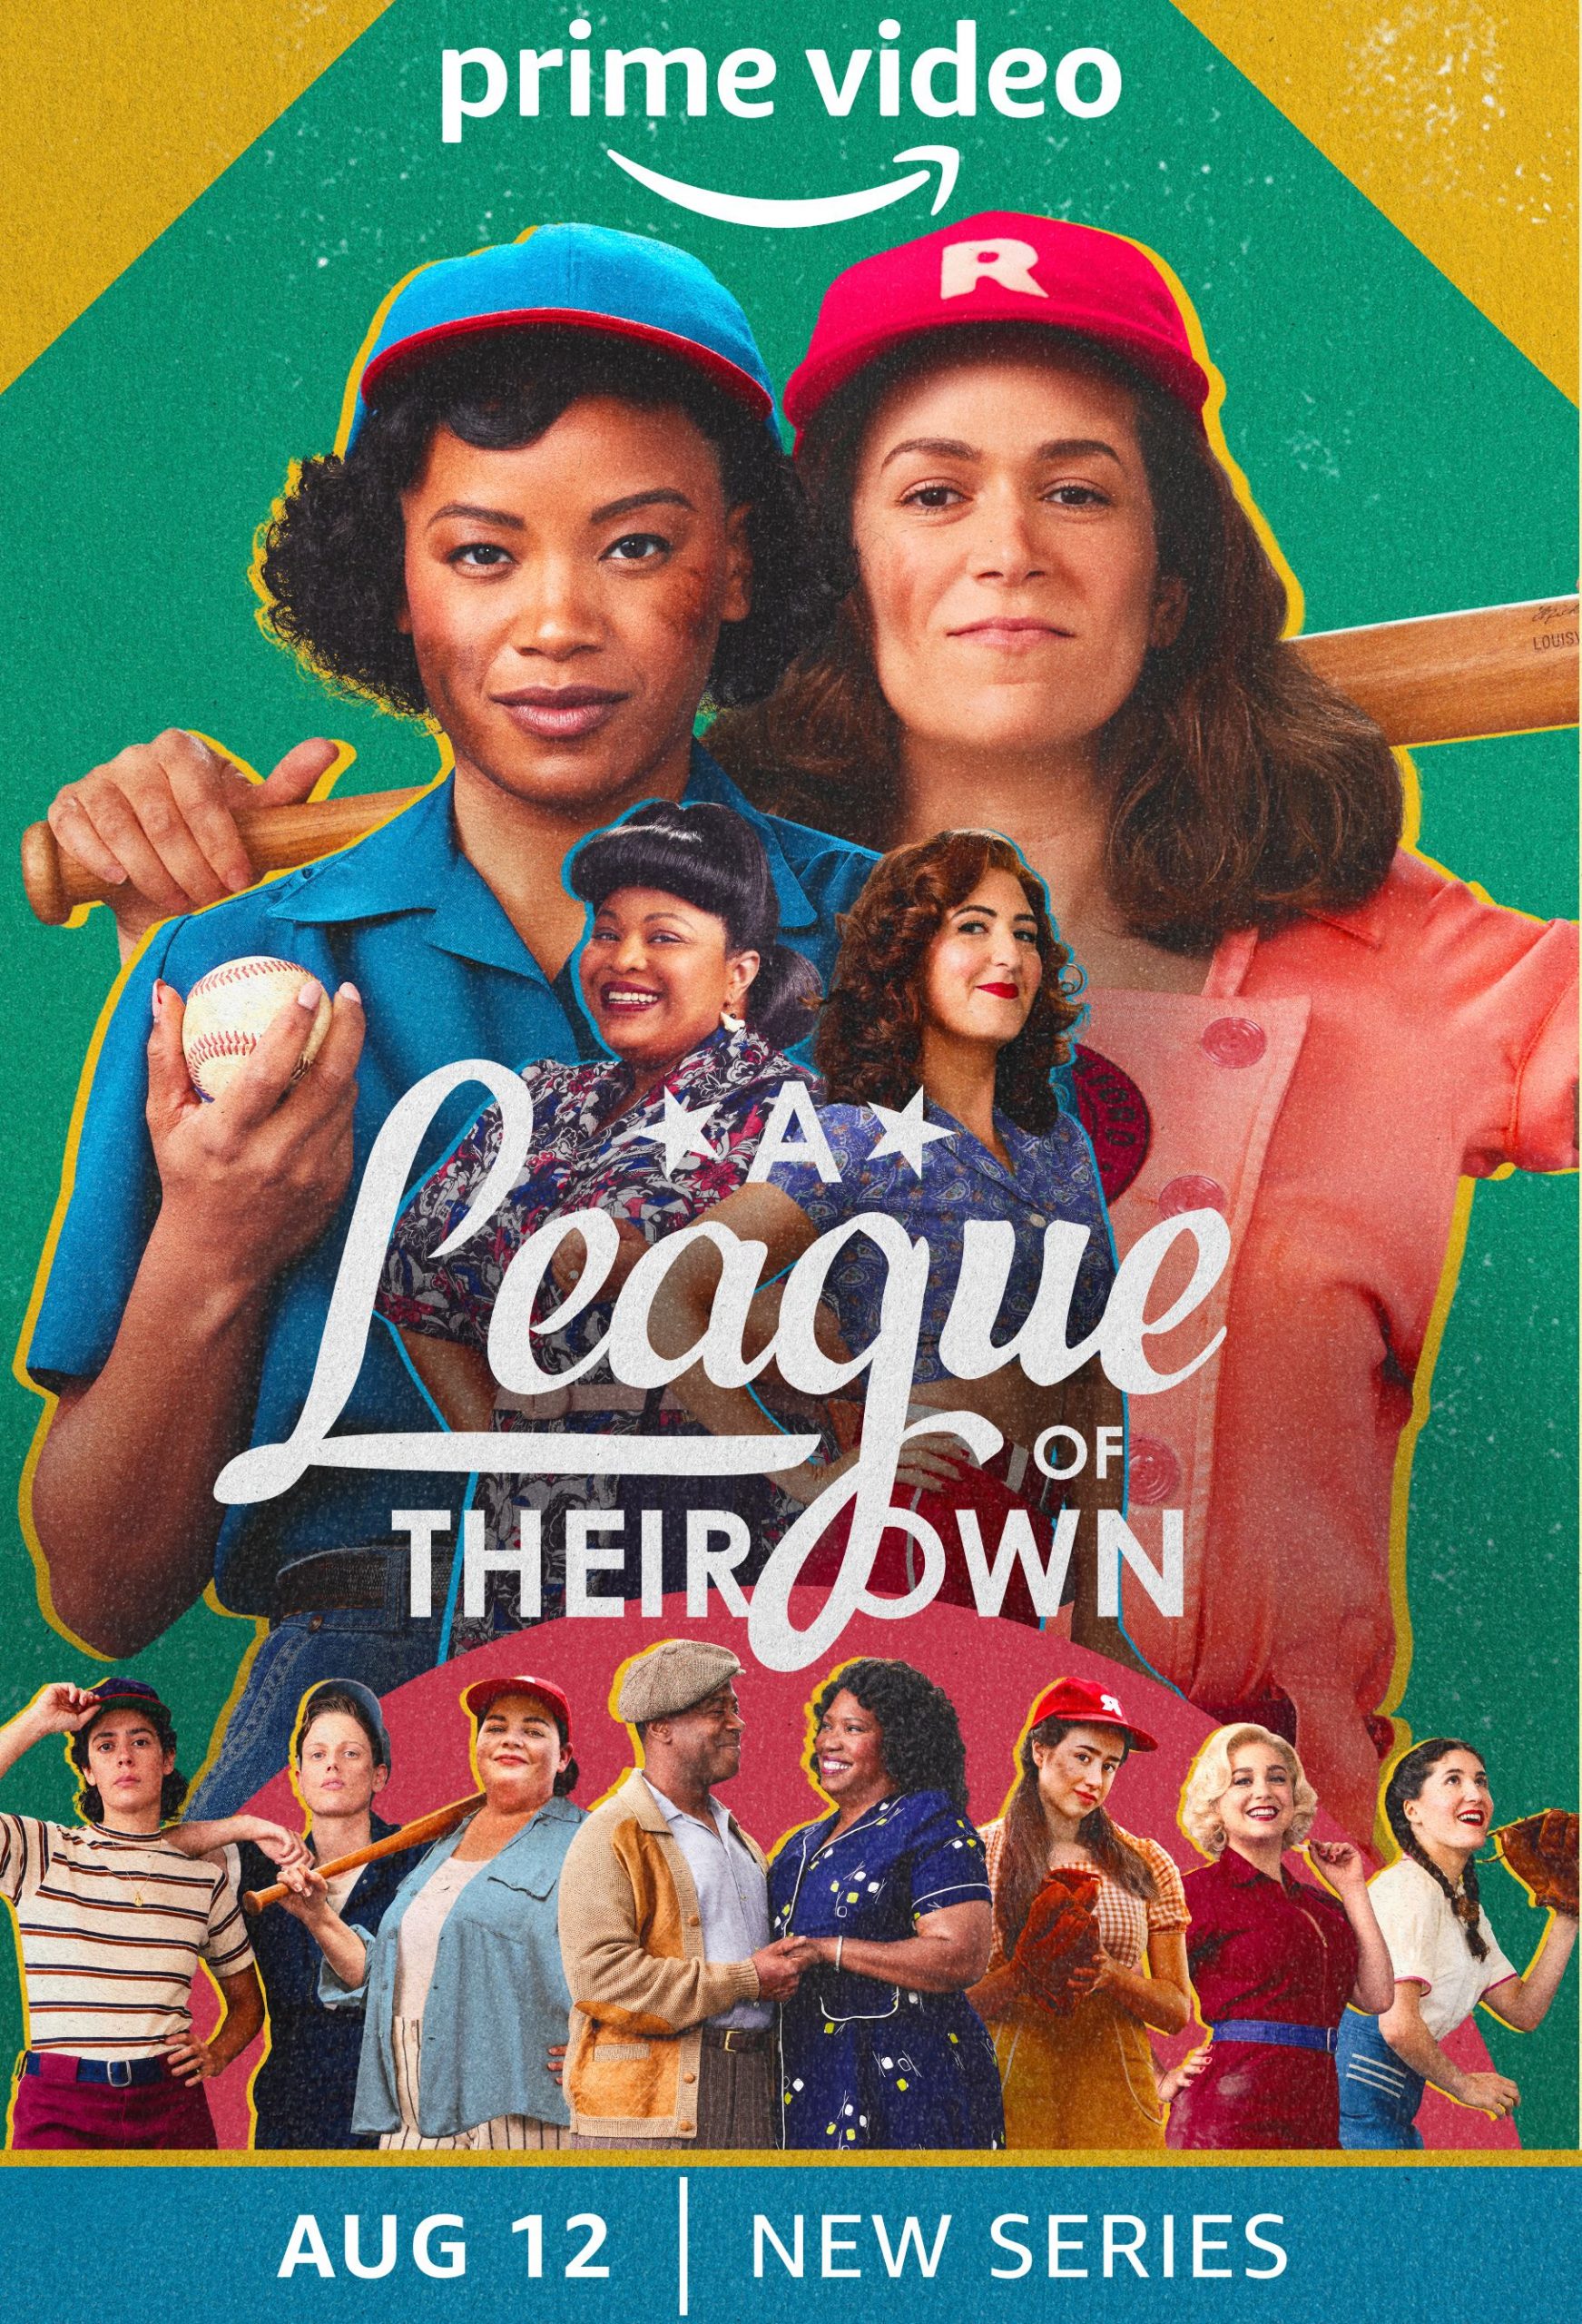 Is “A League of Their Own Season 1” on Prime Video